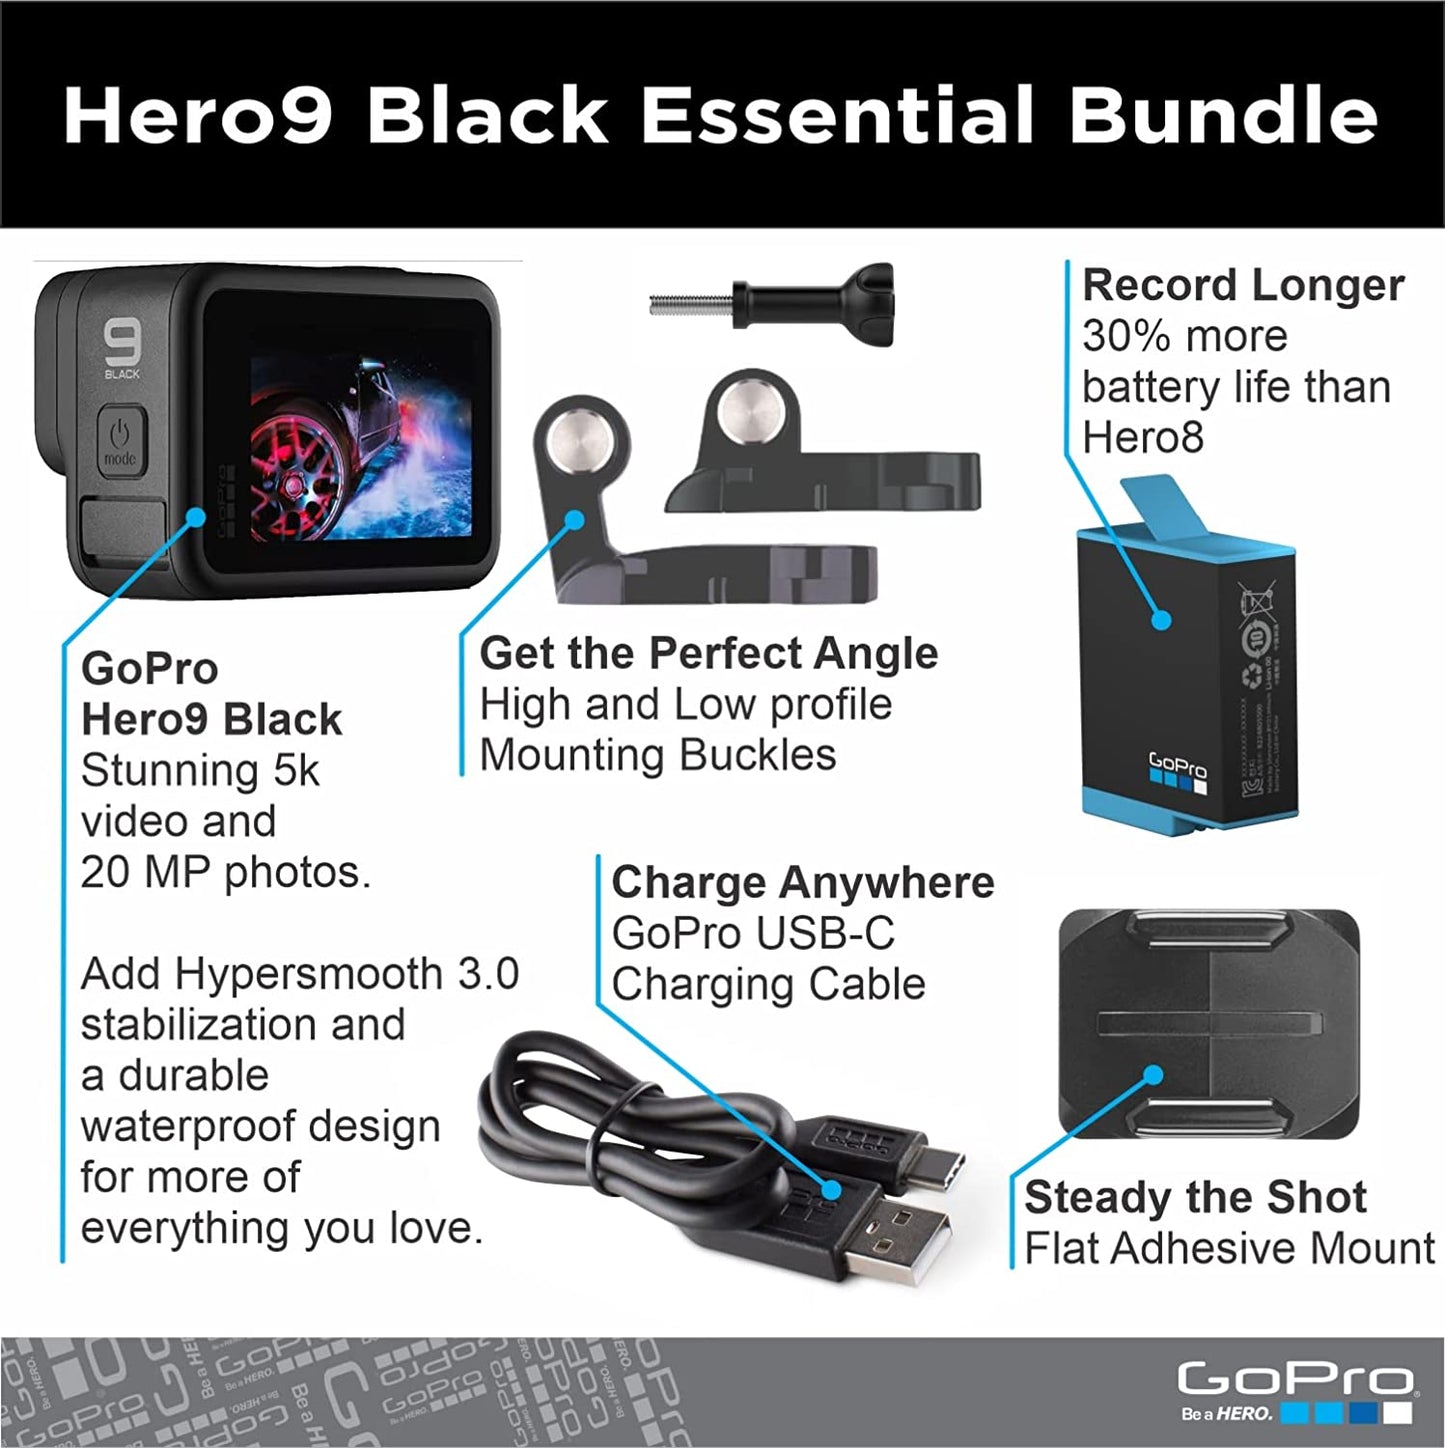 Detailed product features for the GoPro Hero 9. The text says, 'Hero9 Black essential bundle.'